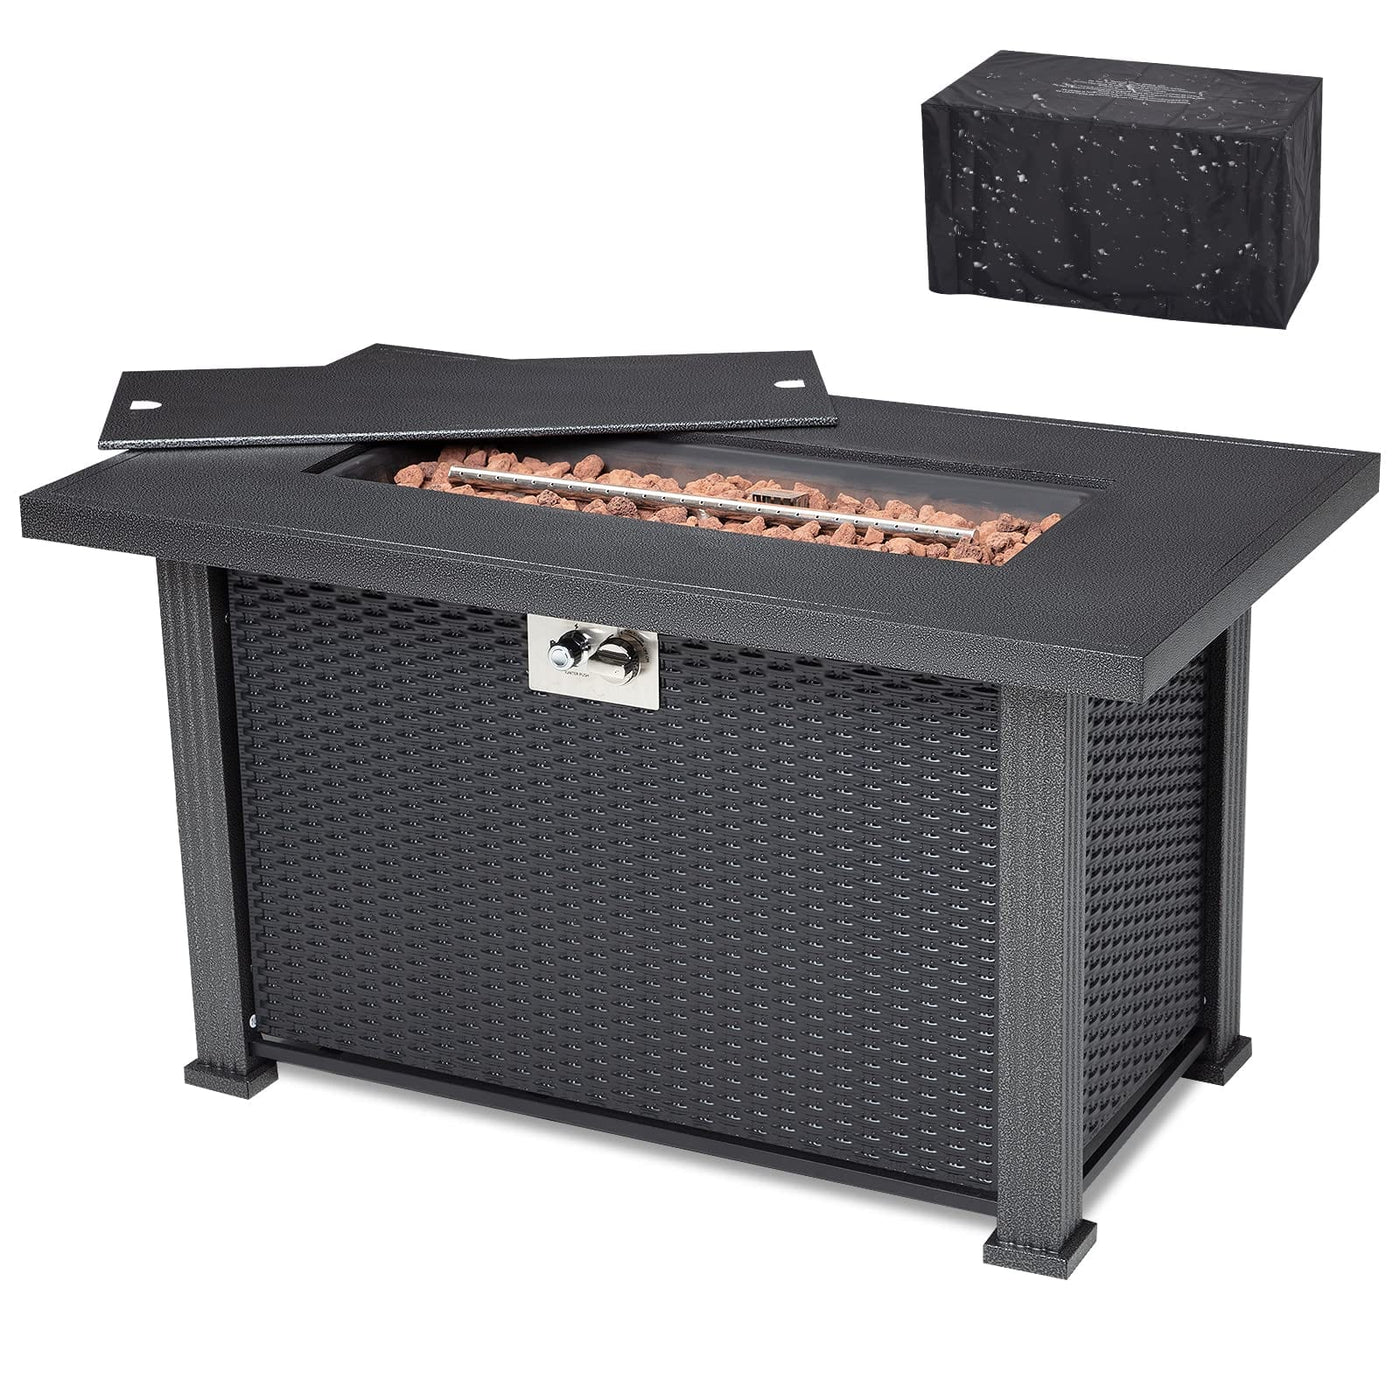 GARVEE 44 Inch Propane Fire Pit Table 50000BTU Rectangle Table with Cover